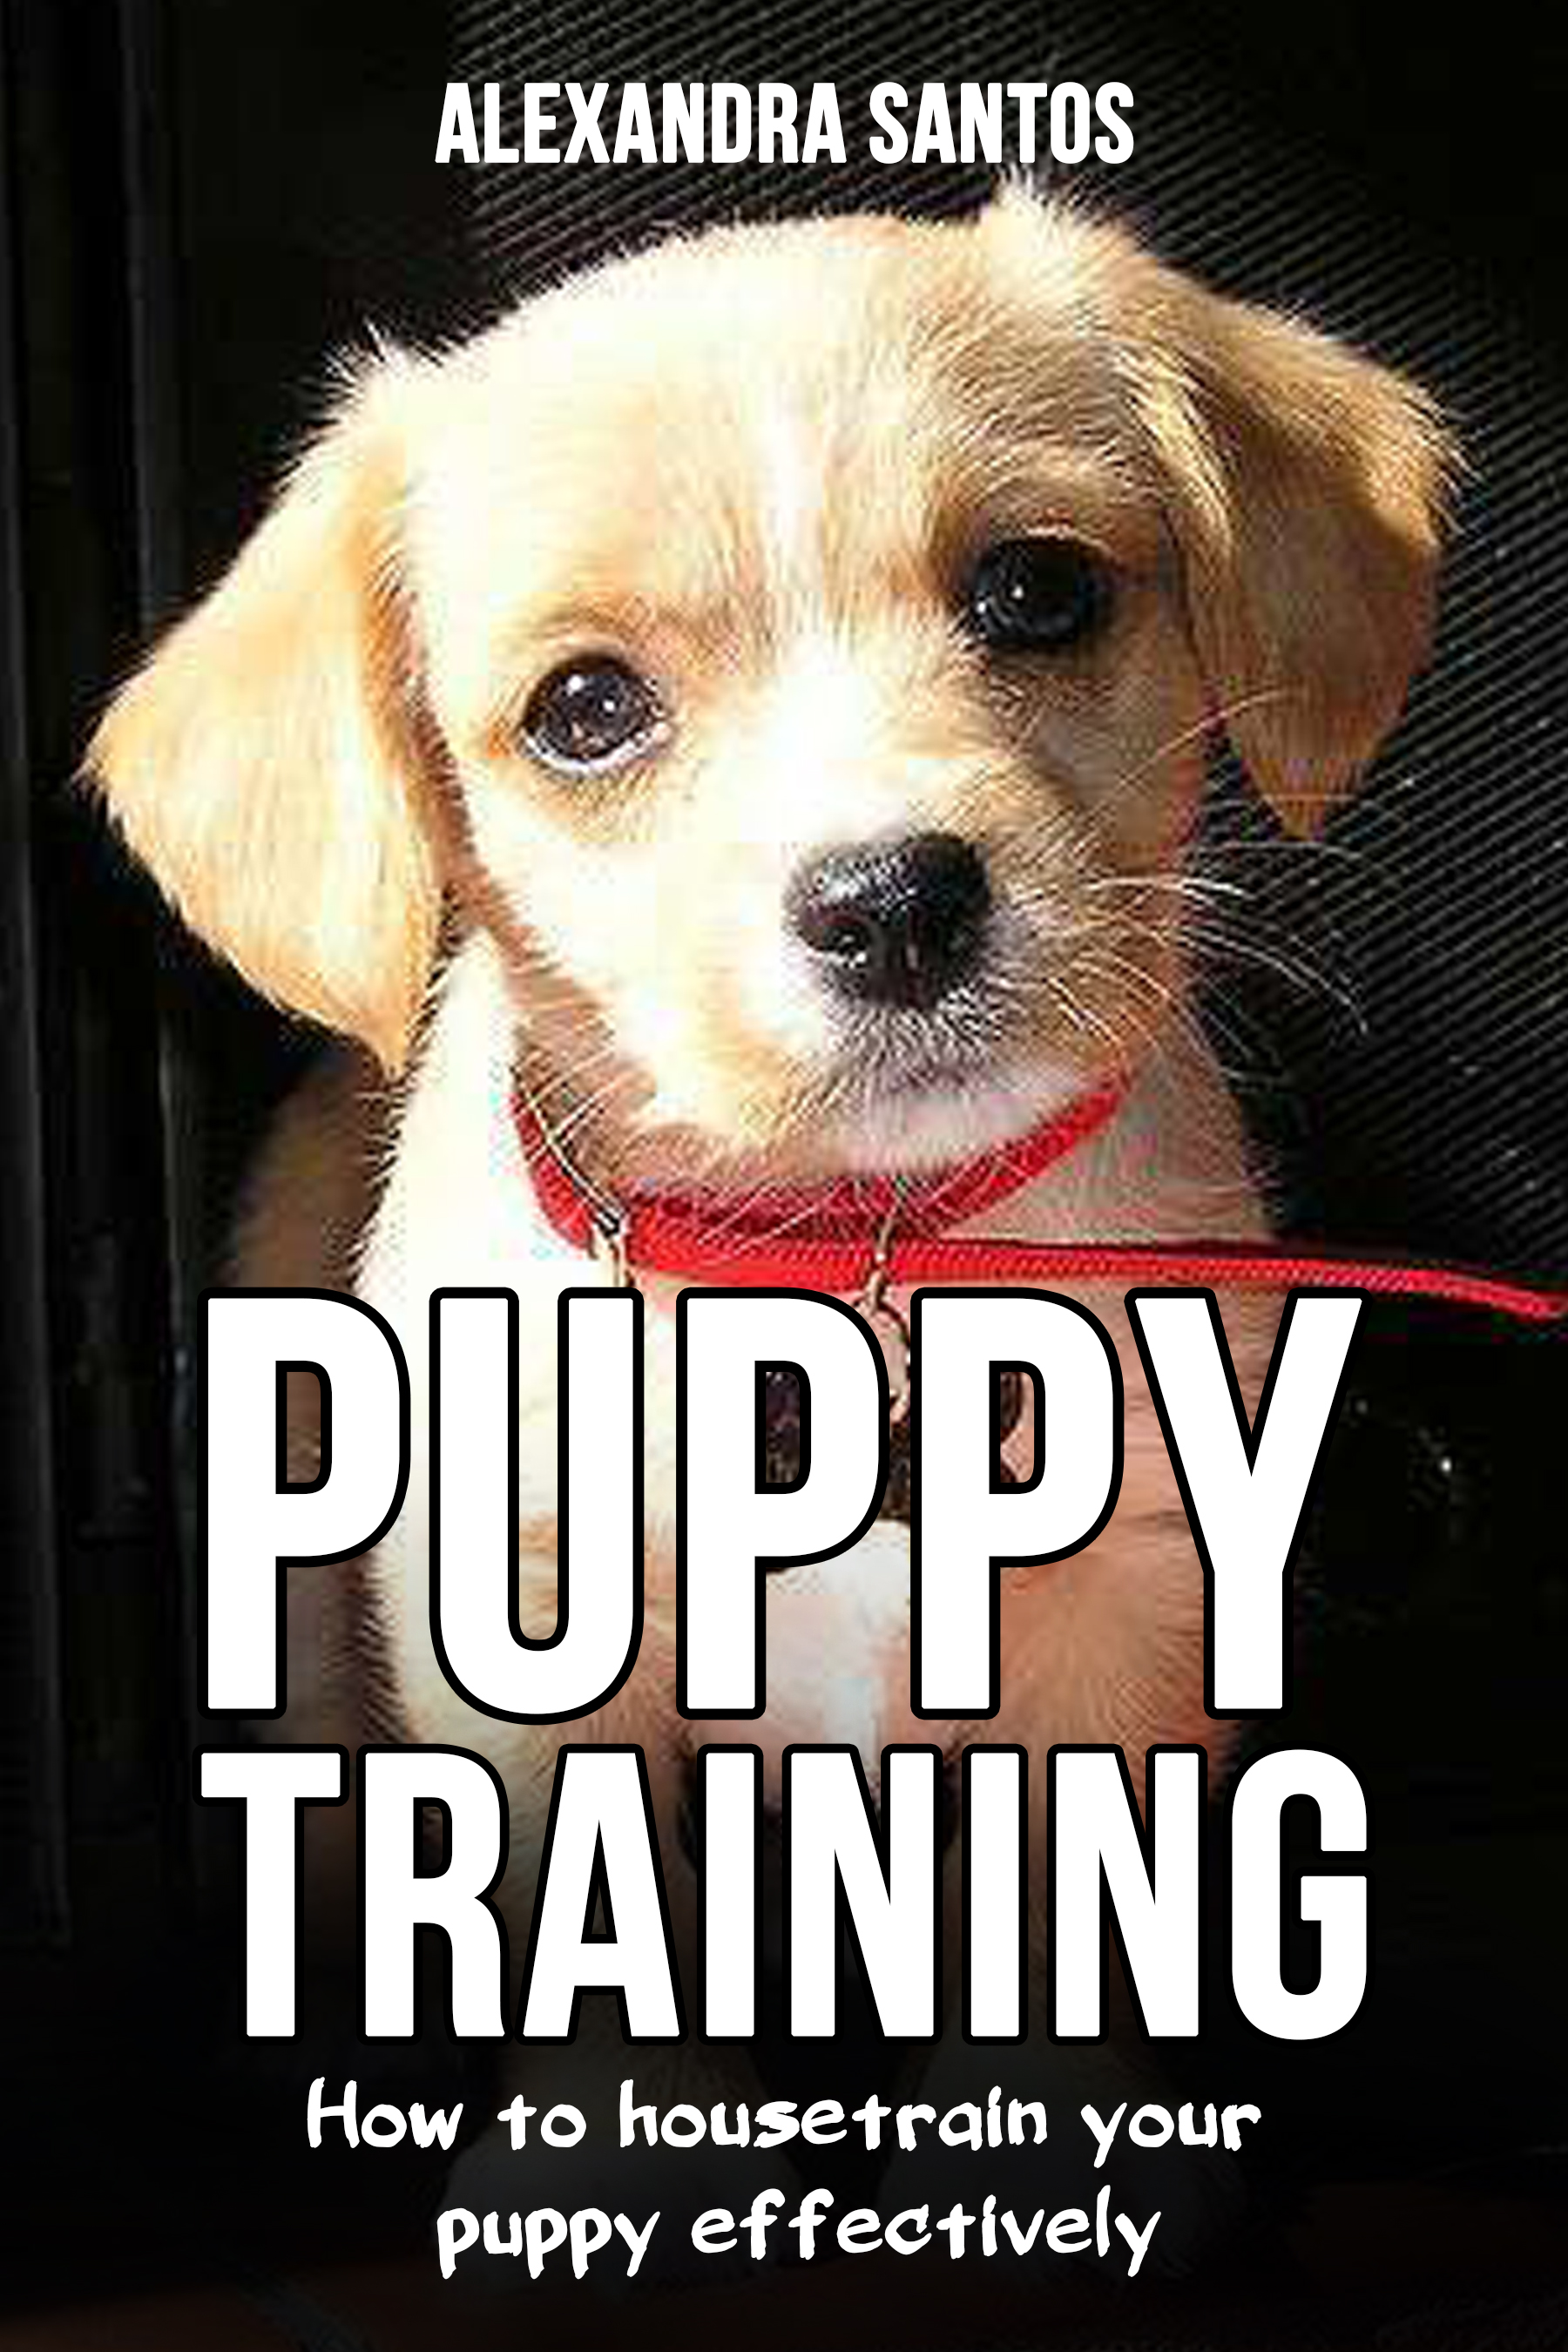 FREE: Puppy Training – how to housetrain your puppy effectively by Alexandra Santos